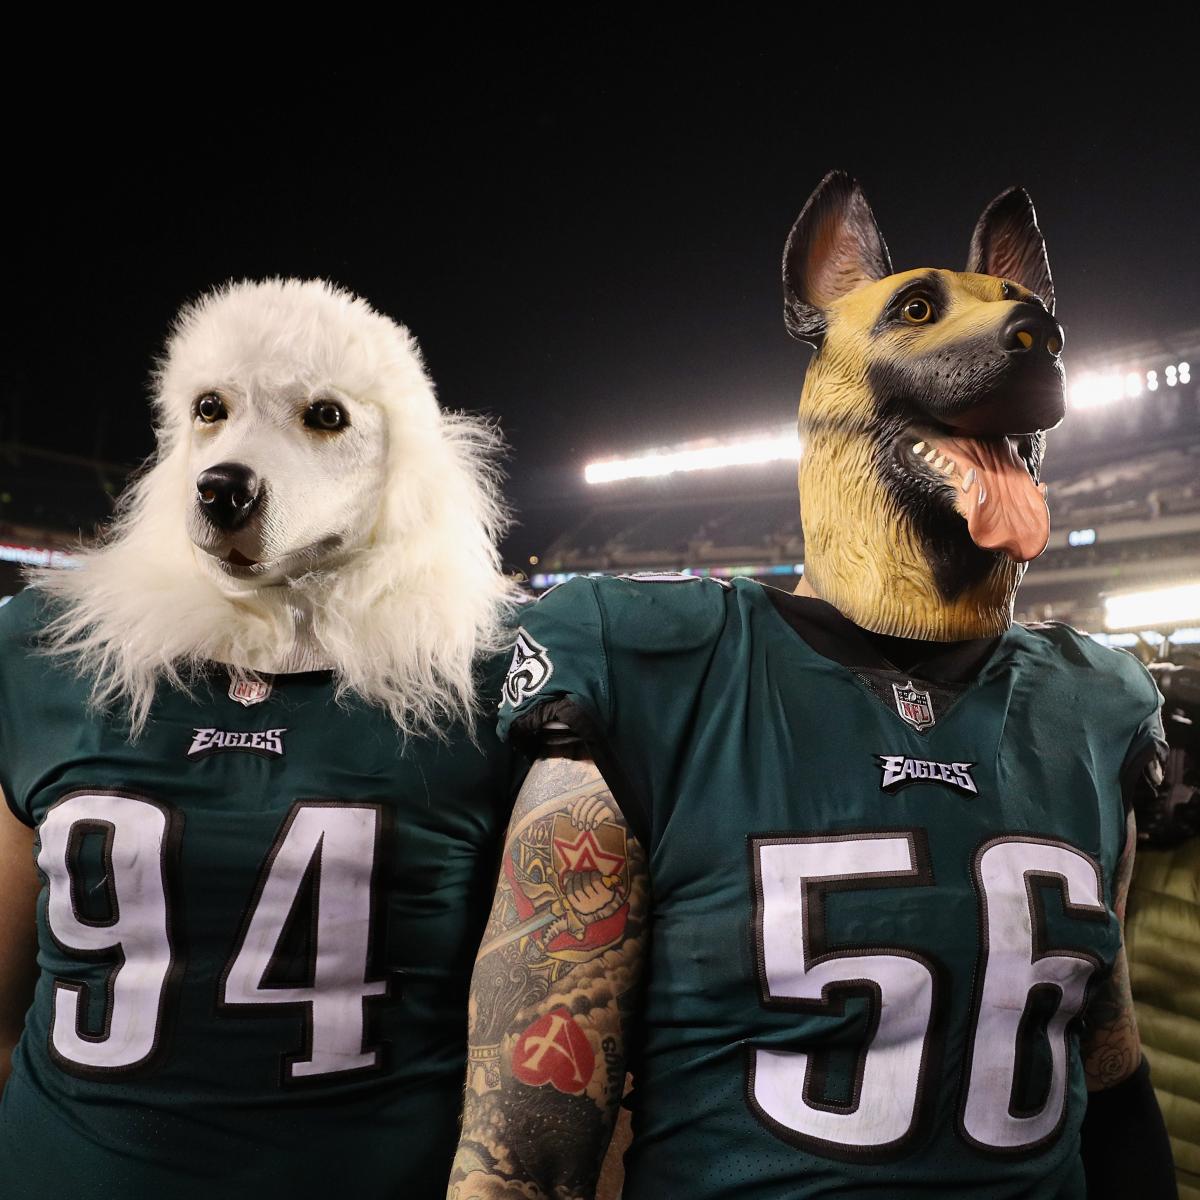 Eagles Open with Largest Underdog Betting Odds in Super Bowl Since 2009